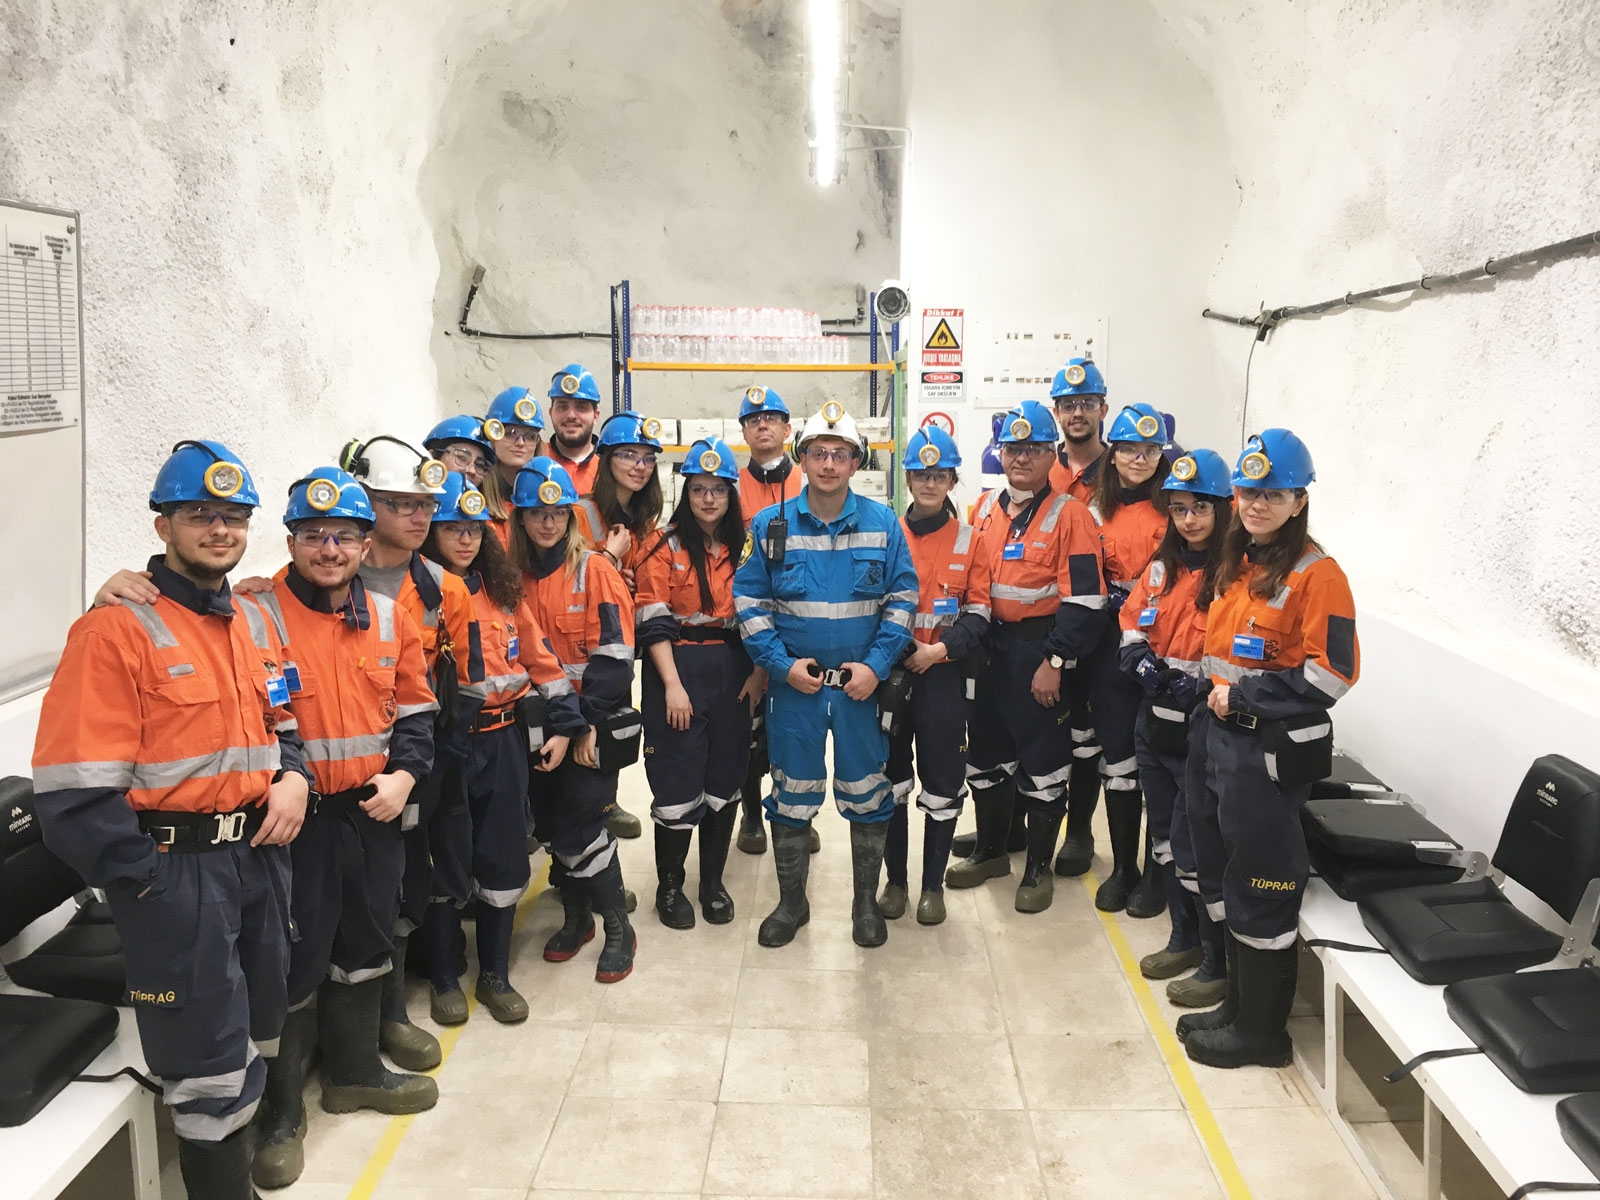 Technical trip at 230 meters below ground surface